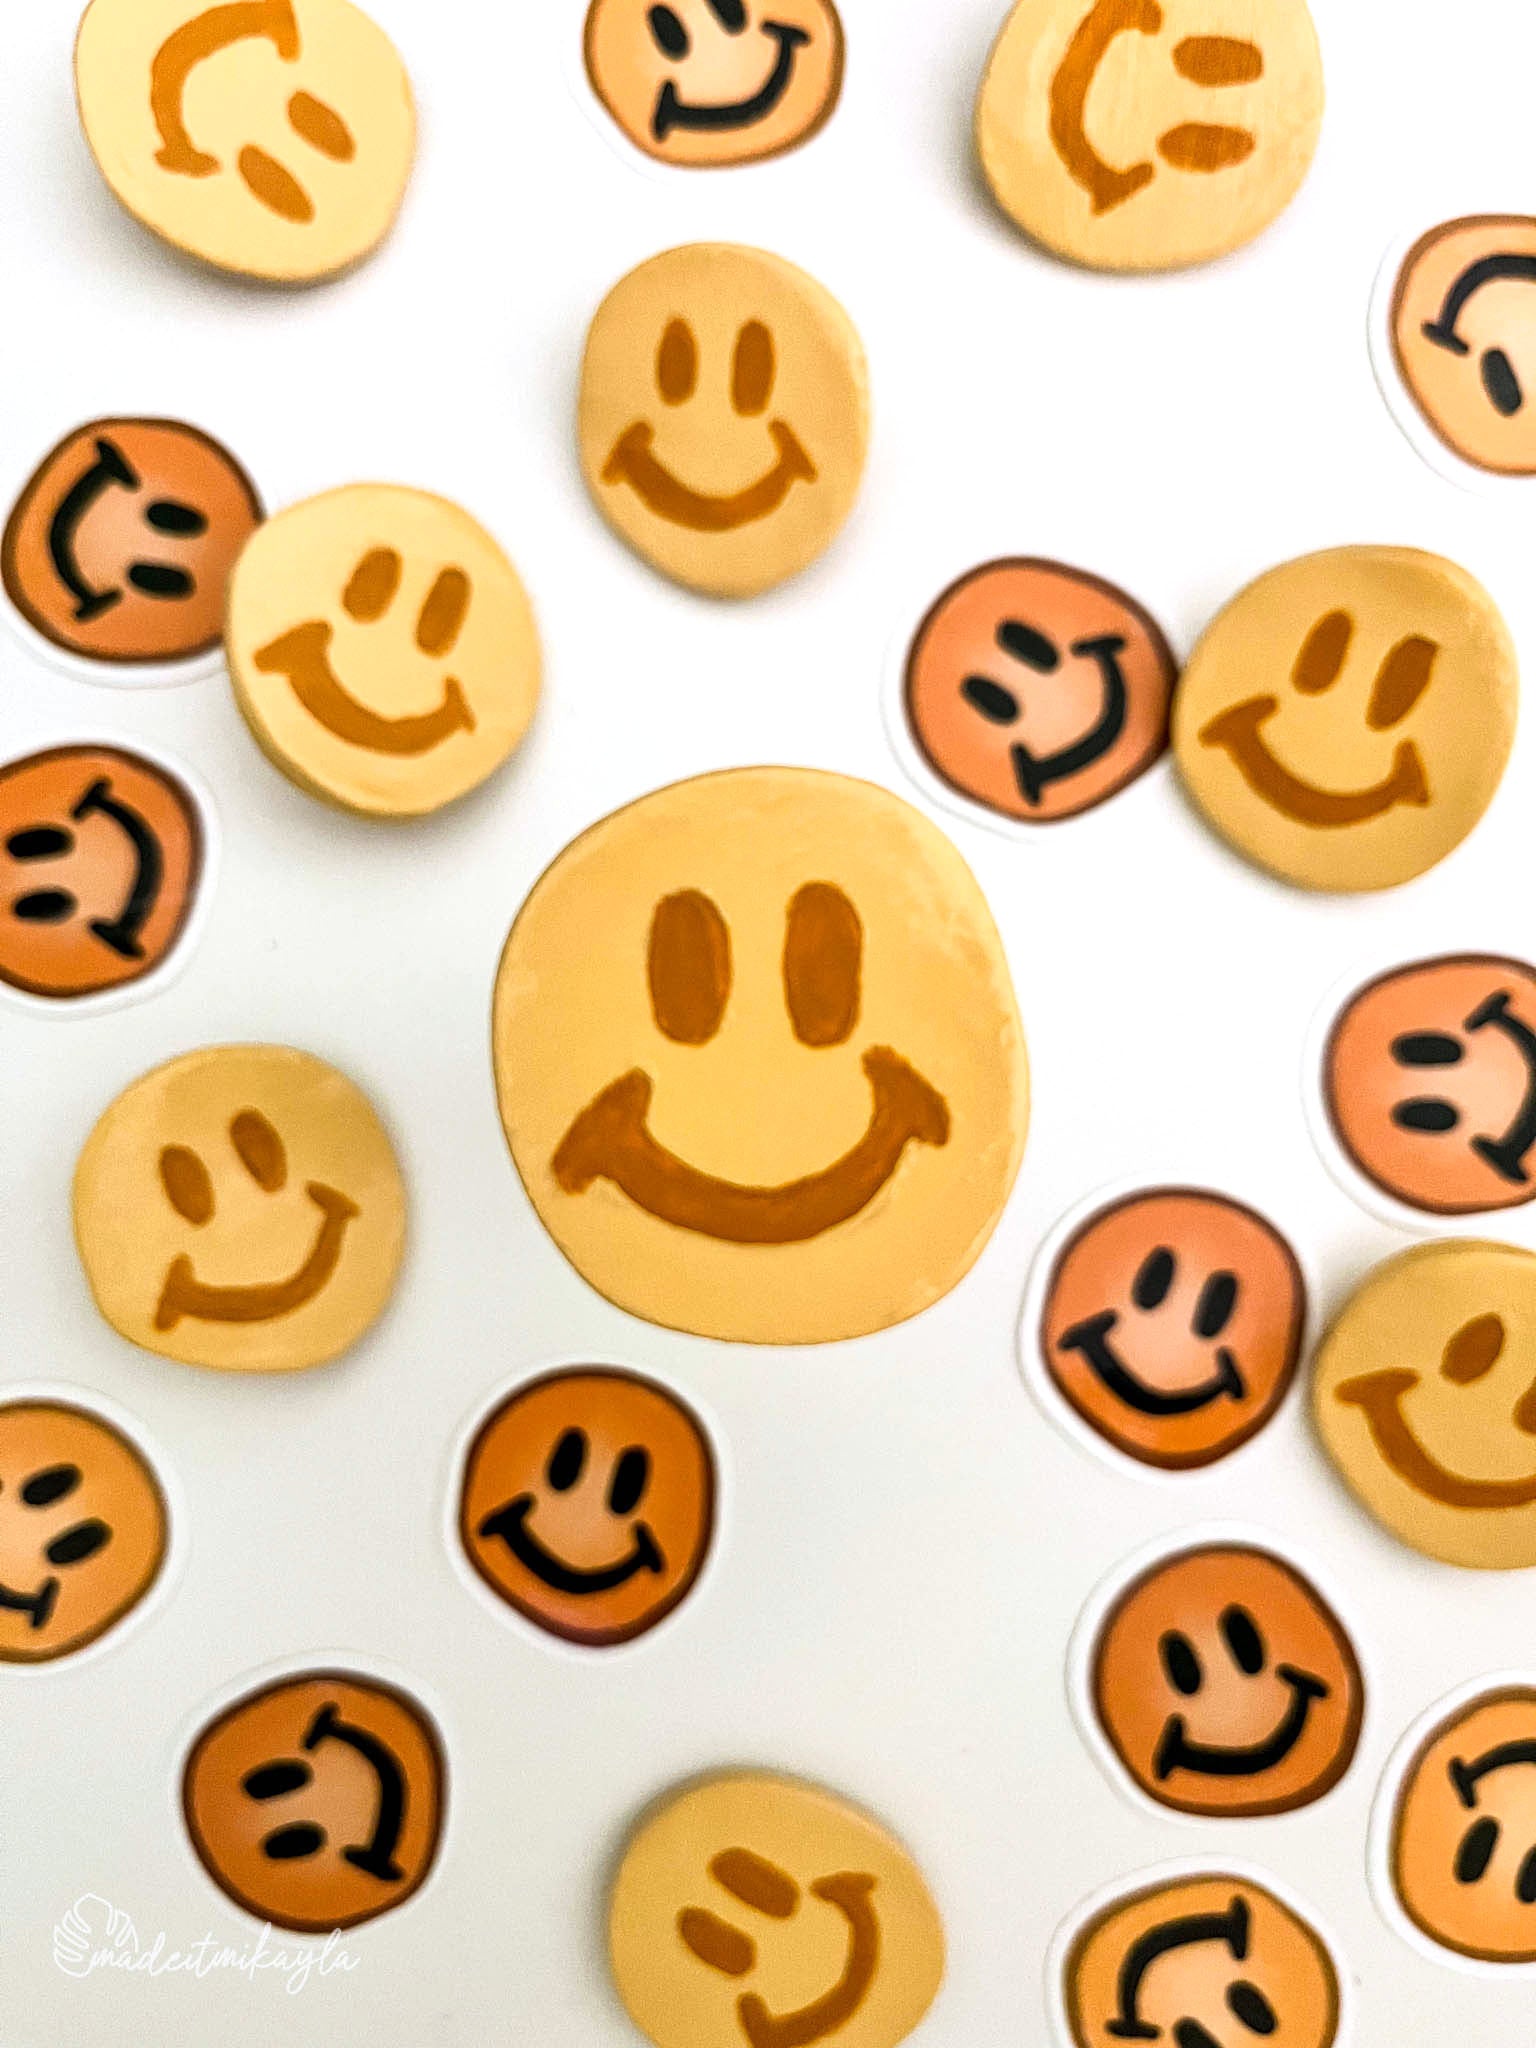 Smiley Face Clay Magnet | MadeItMikayla